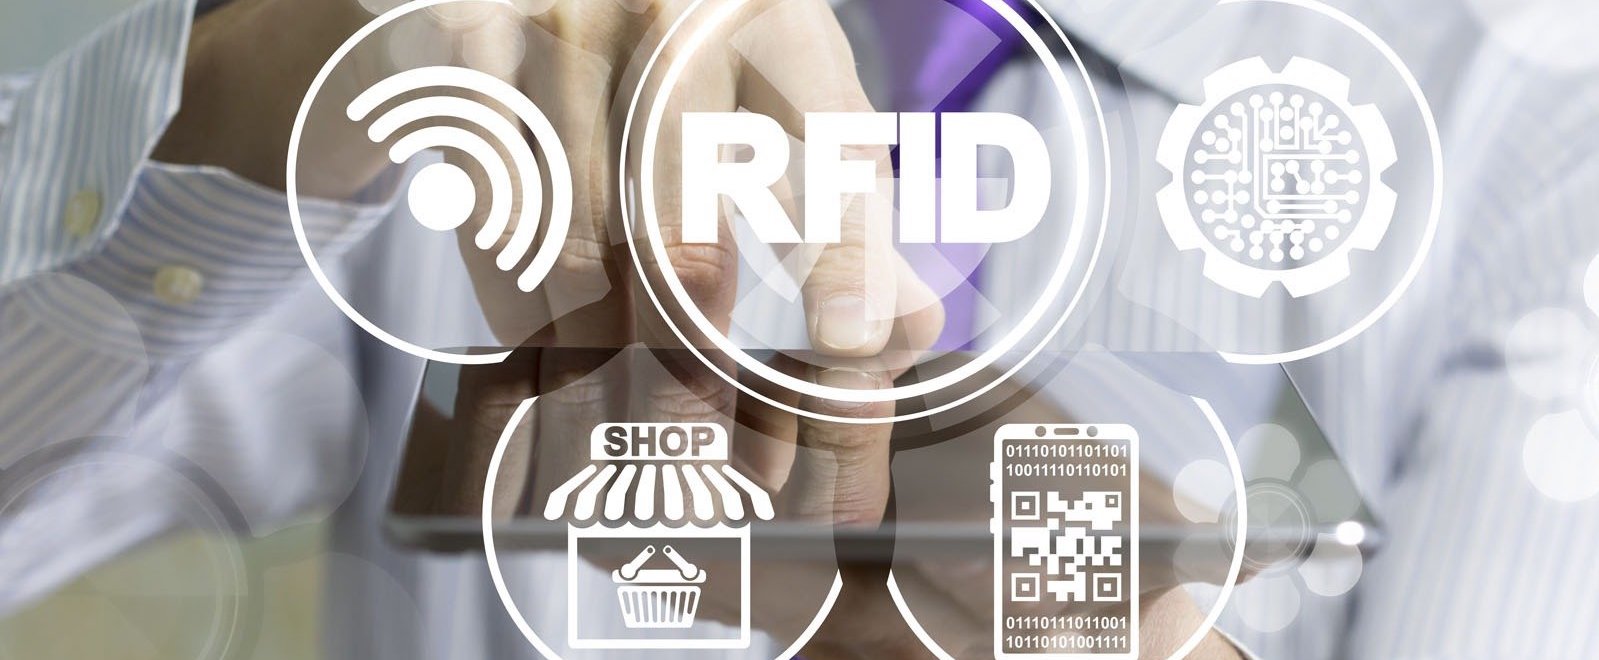 RFID_customer experience management_CRM